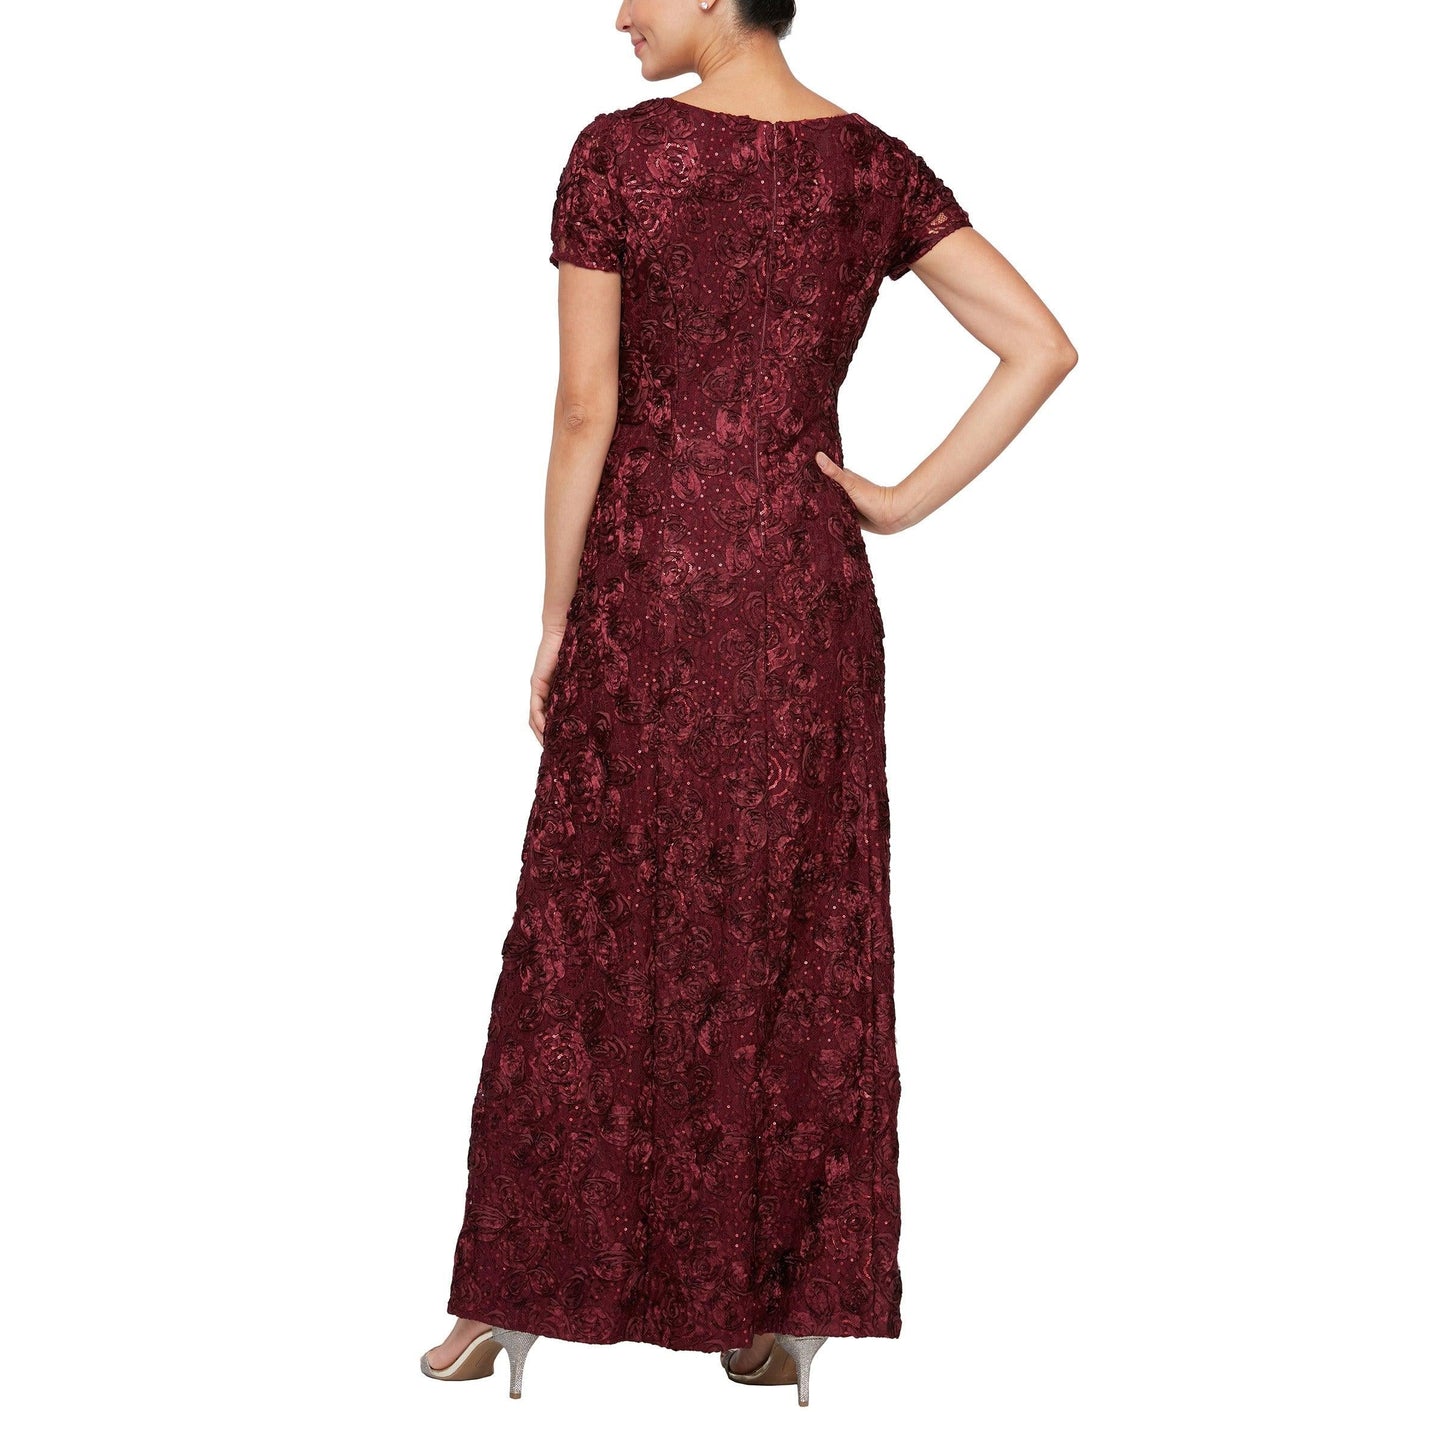 Alex Evenings Long Mother of the Bride Dress 112788 - The Dress Outlet